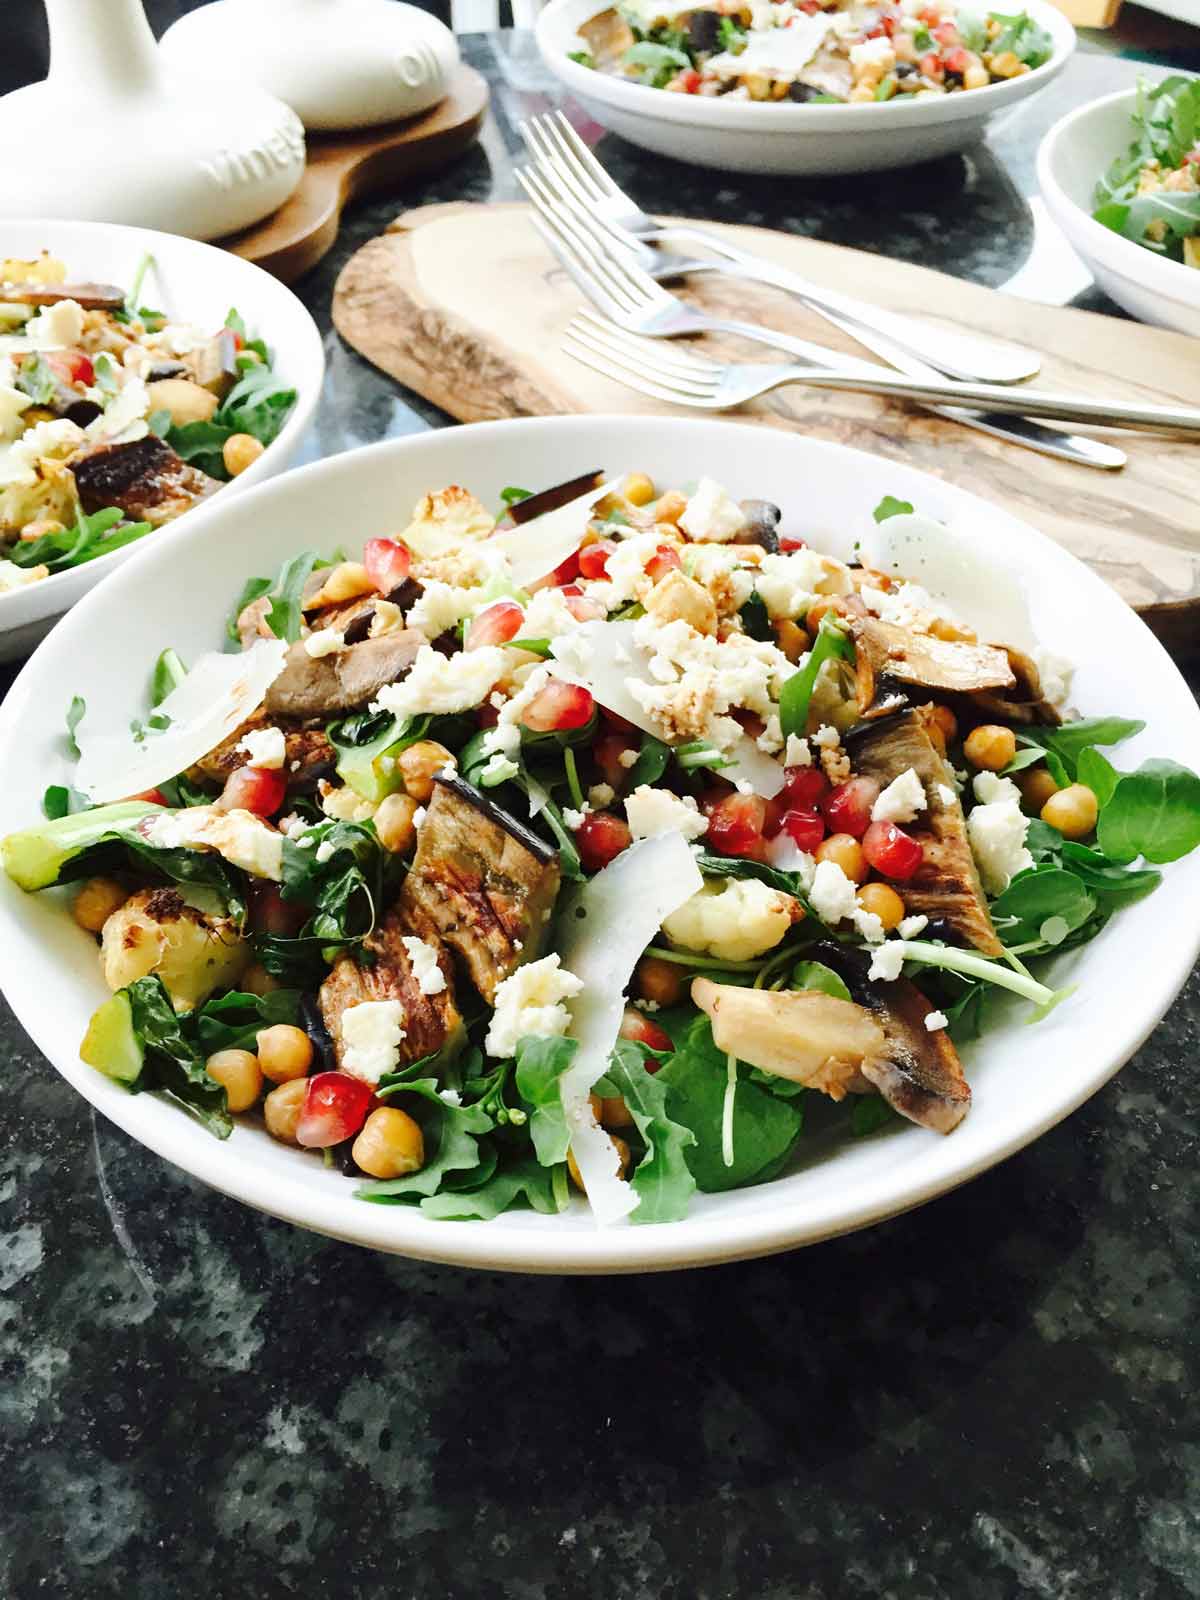 Enjoy this nutritious cauliflower, aubergine and chickpeas salad, a 'customizable' treat that will brighten your day.